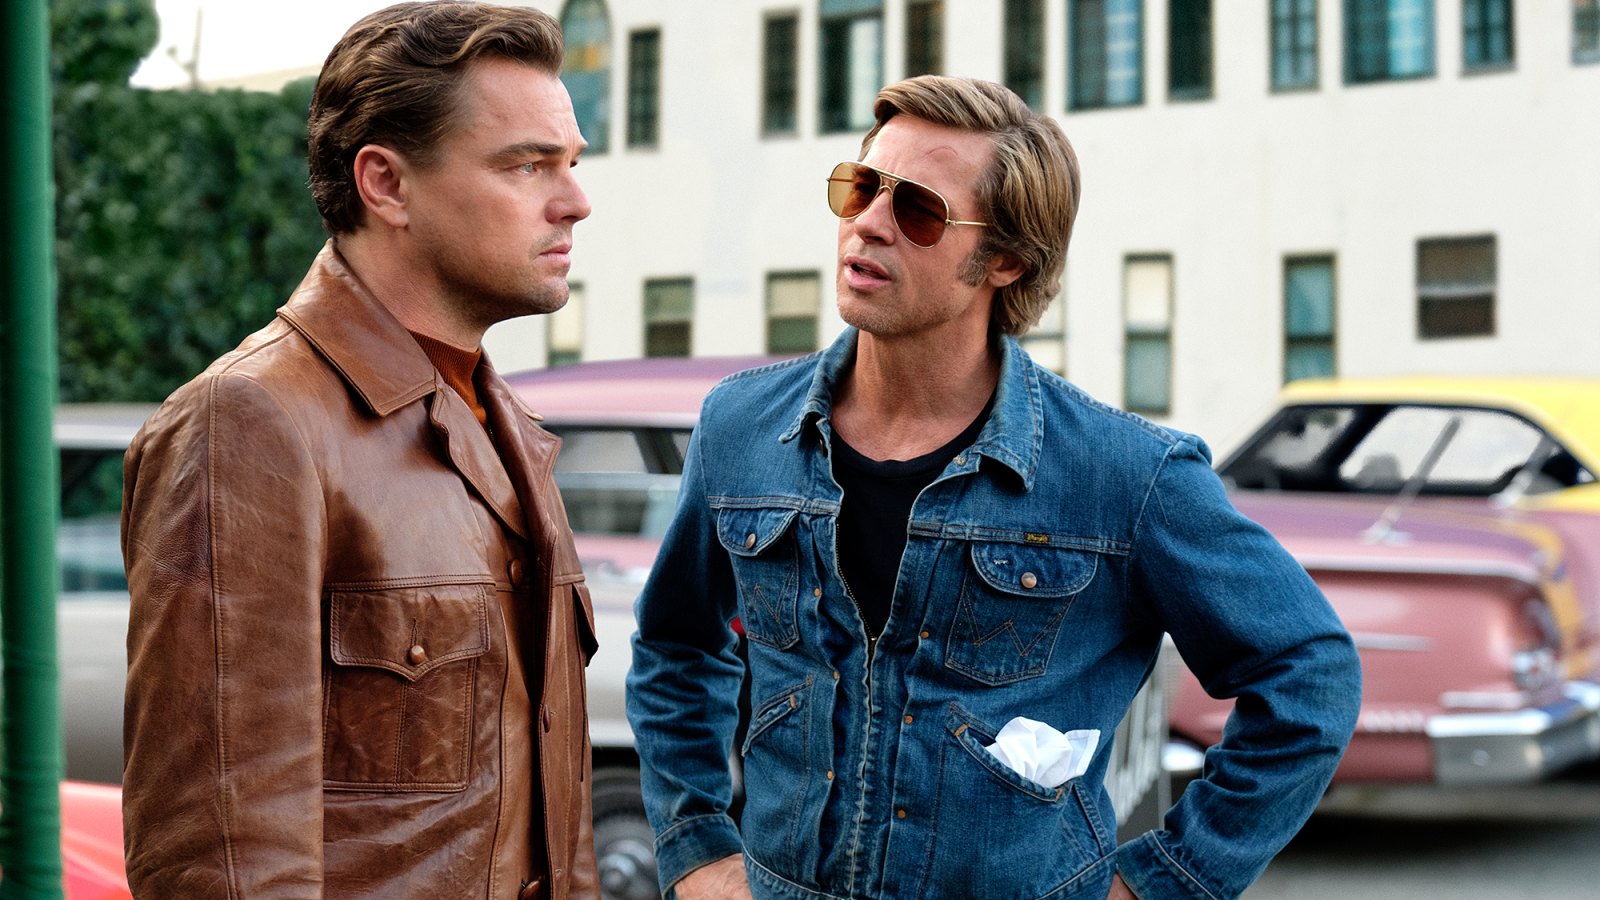 Leonardo DiCaprio and Brad Pitt Once Upon Time In Hollywood SAG 2020 Nominations